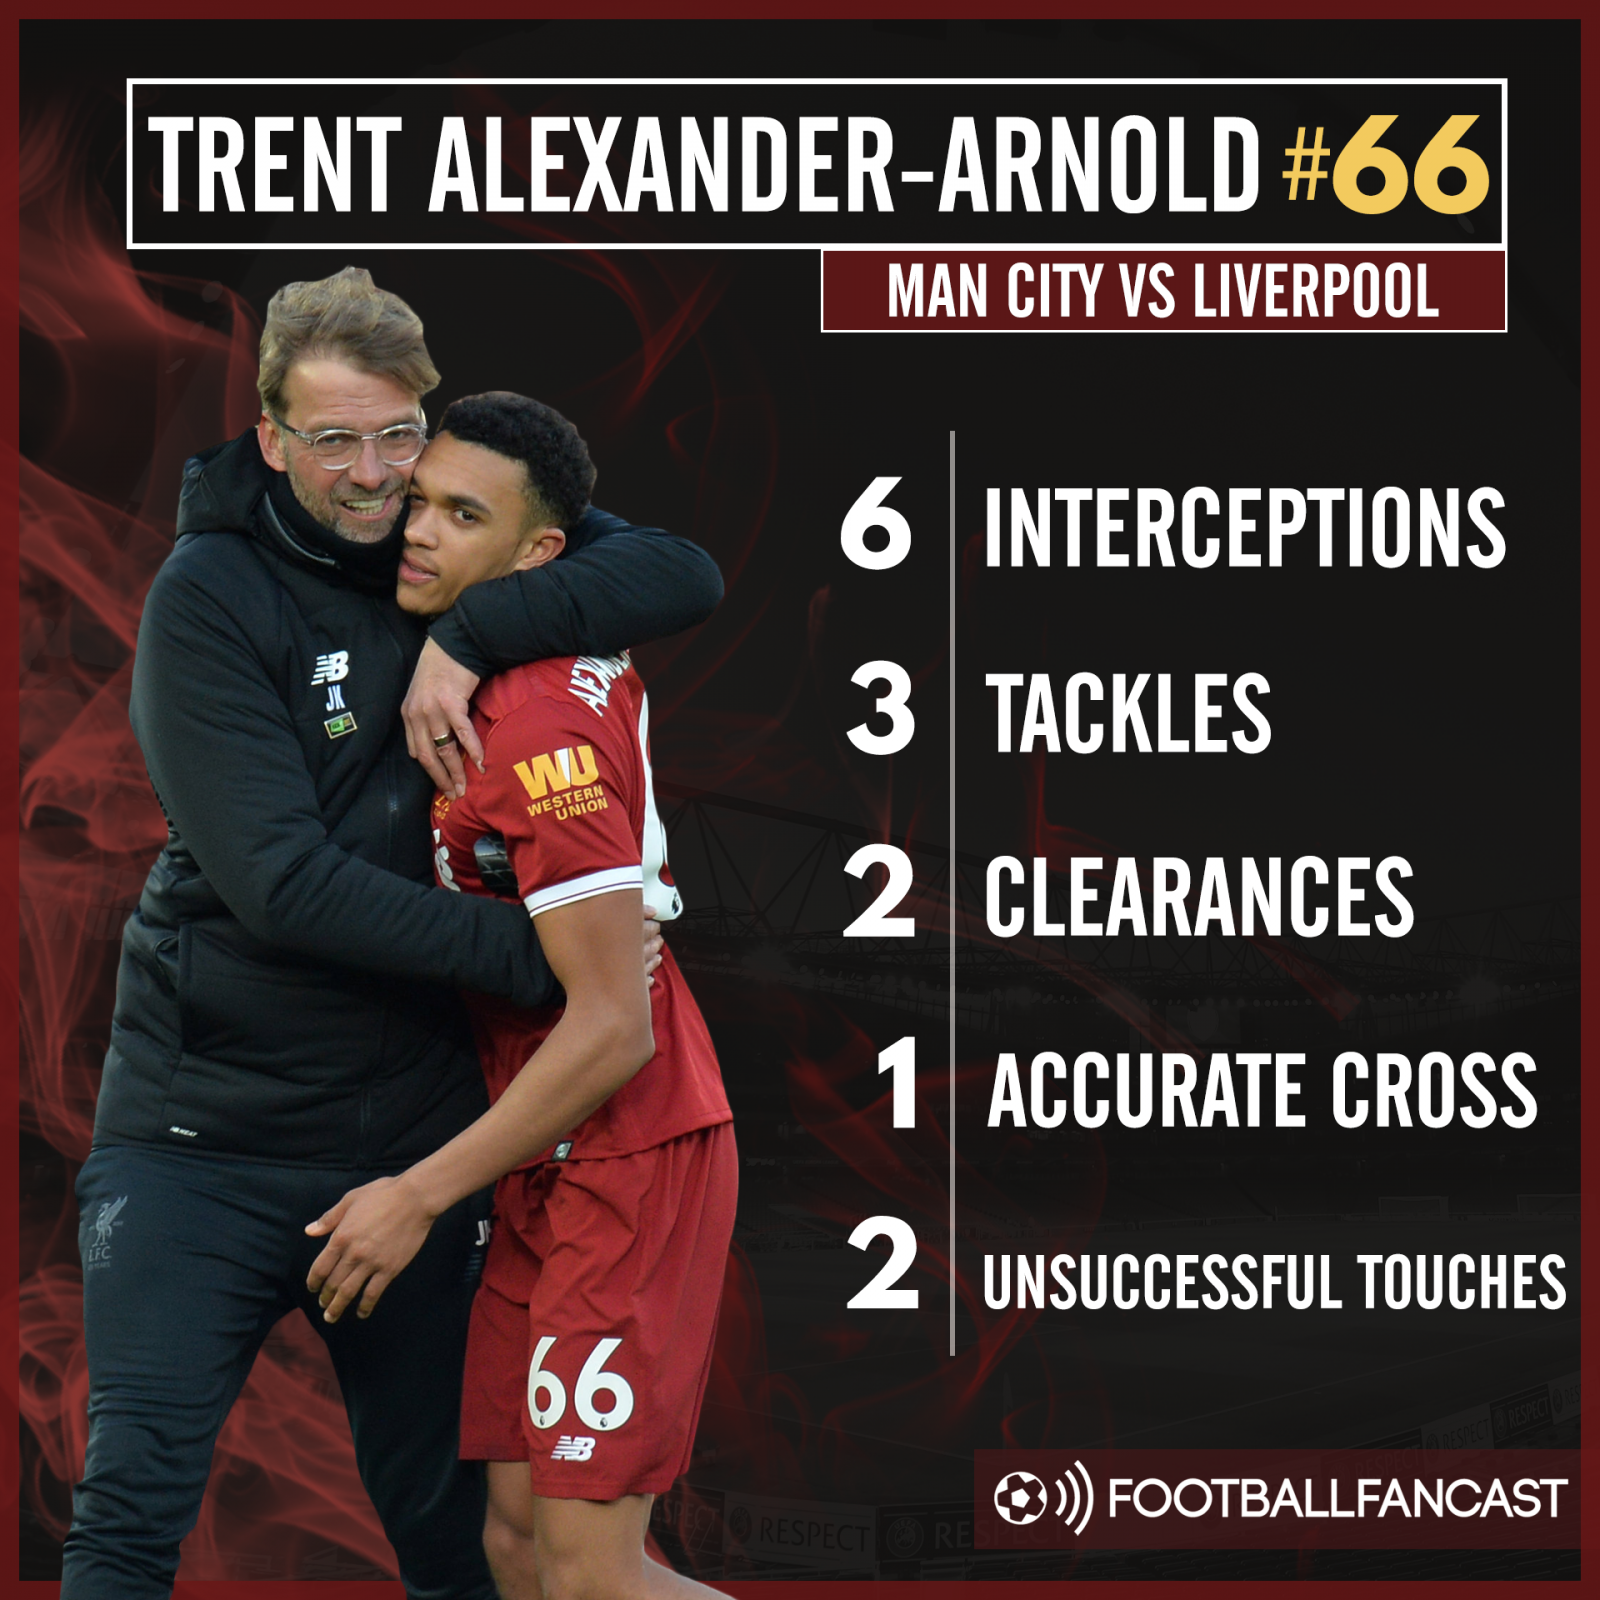 Trent Alexander-Arnold's stats from Liverpool's 2-1 win over Man City